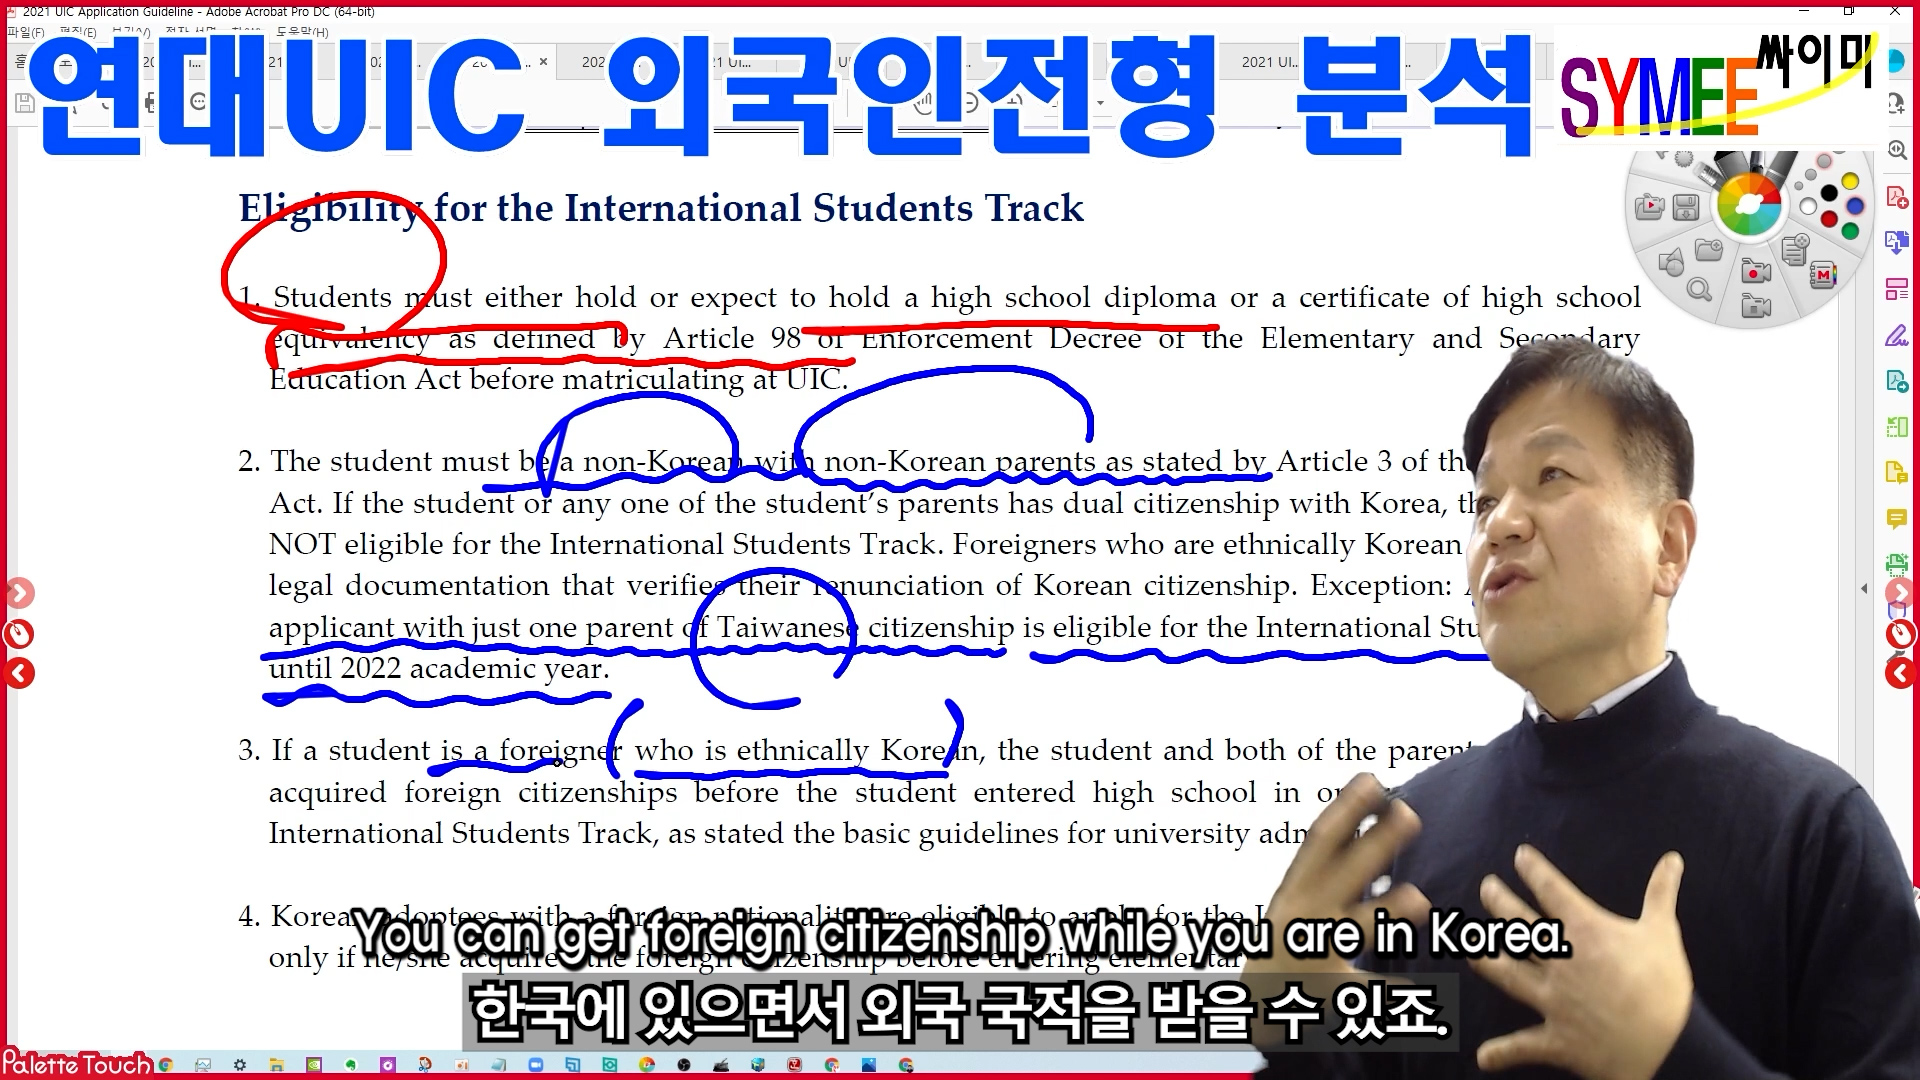 Yonsei Univ. Admission for UIC for Foreign Student 02 Qualifications.00_05_33_31.스틸 011.jpg